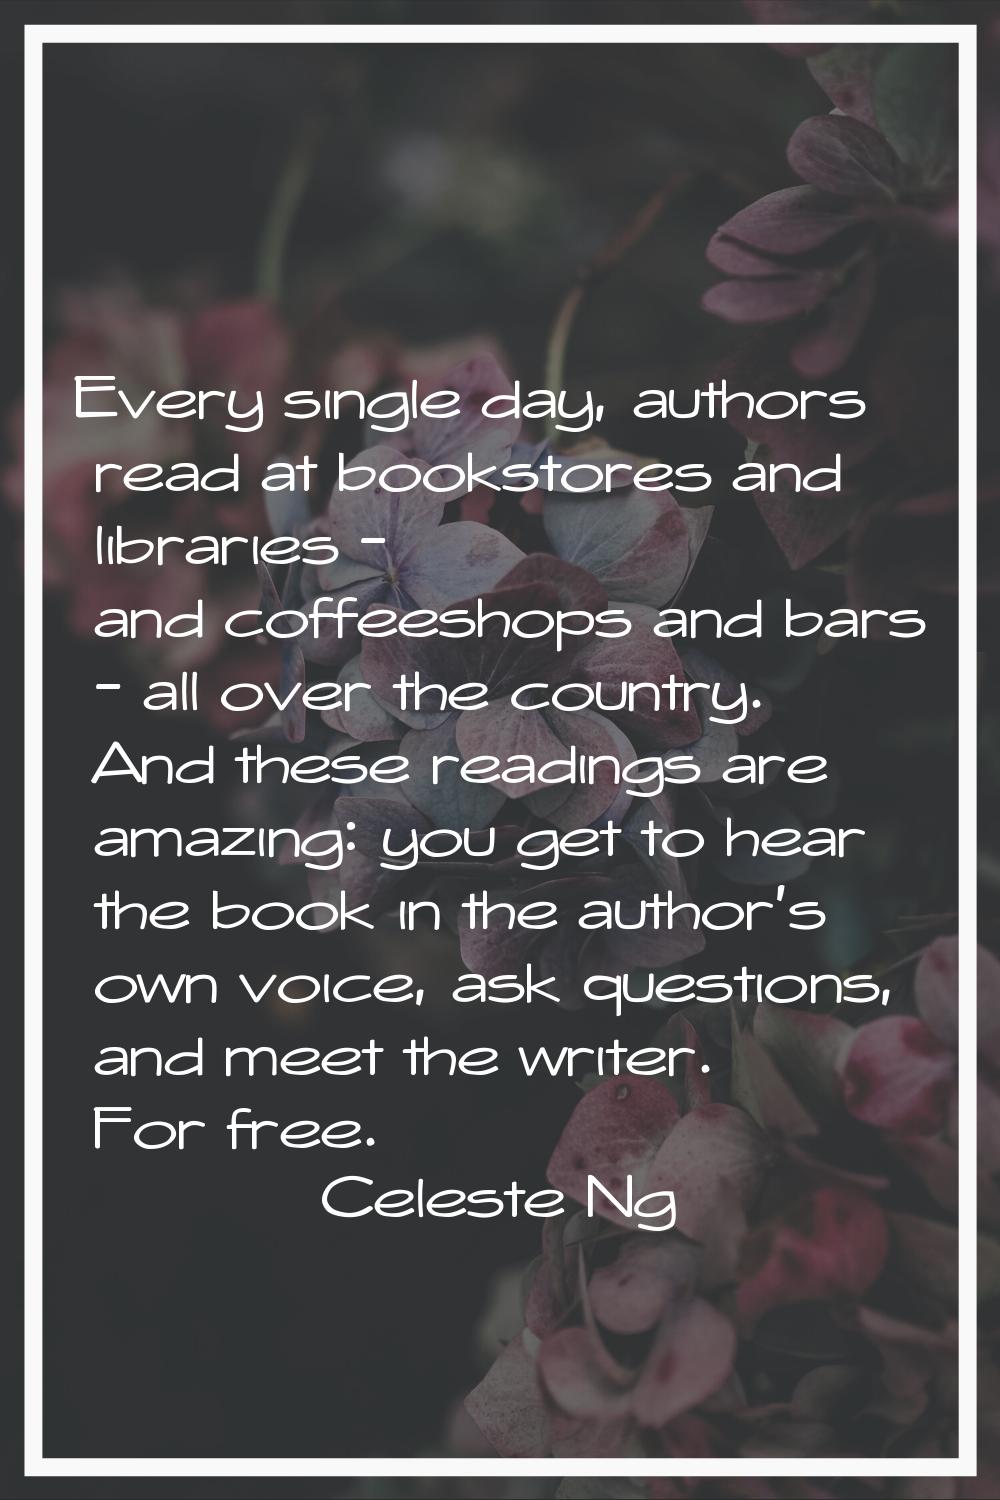 Every single day, authors read at bookstores and libraries - and coffeeshops and bars - all over th